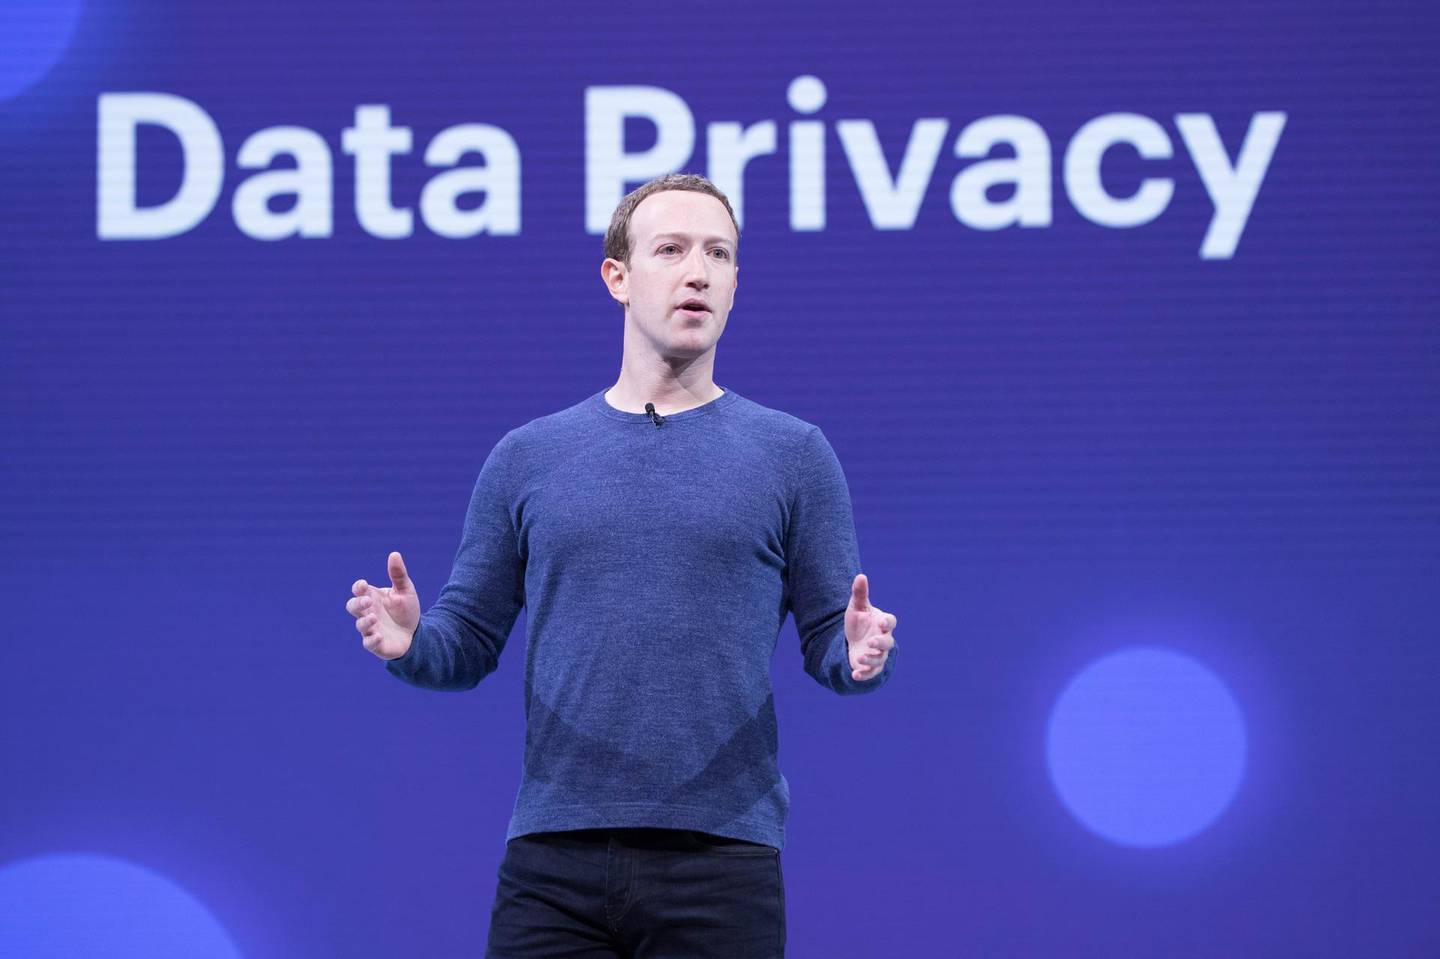 Facebook CEO Mark Zuckerberg talks about data privacy. Courtesy flickr / Anthony Quintano from Honolulu